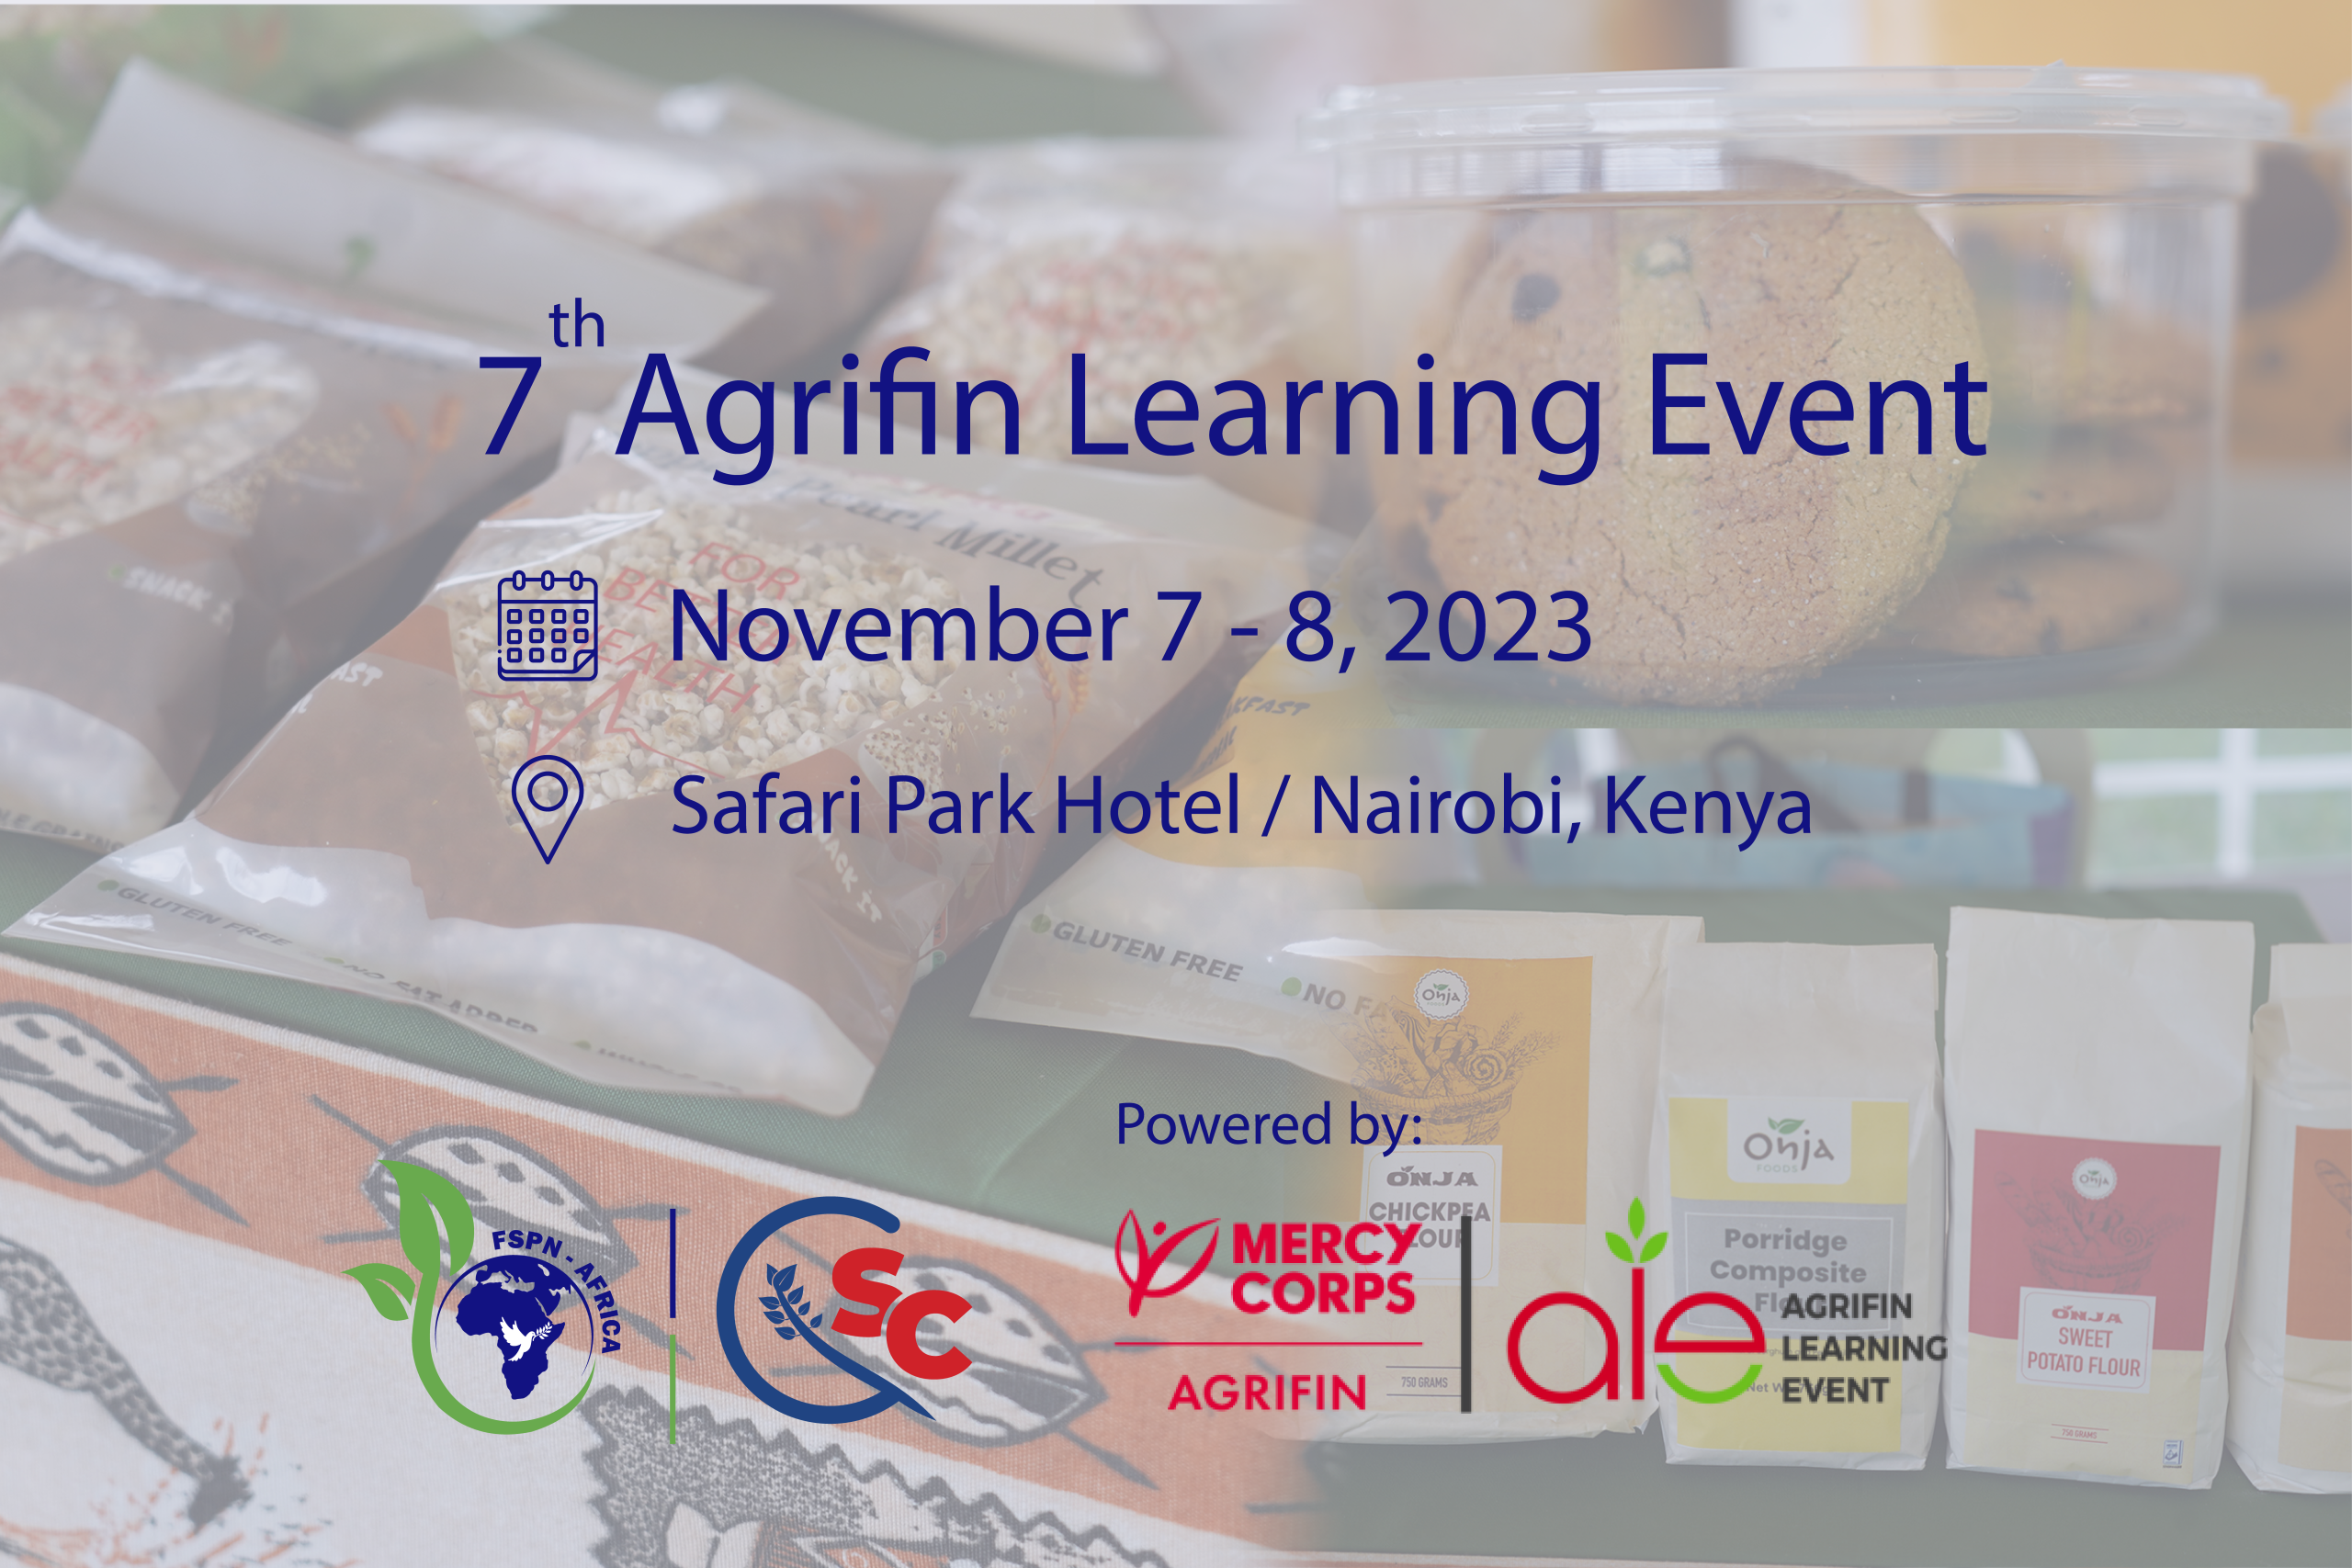 7th Agrifin Learning Event